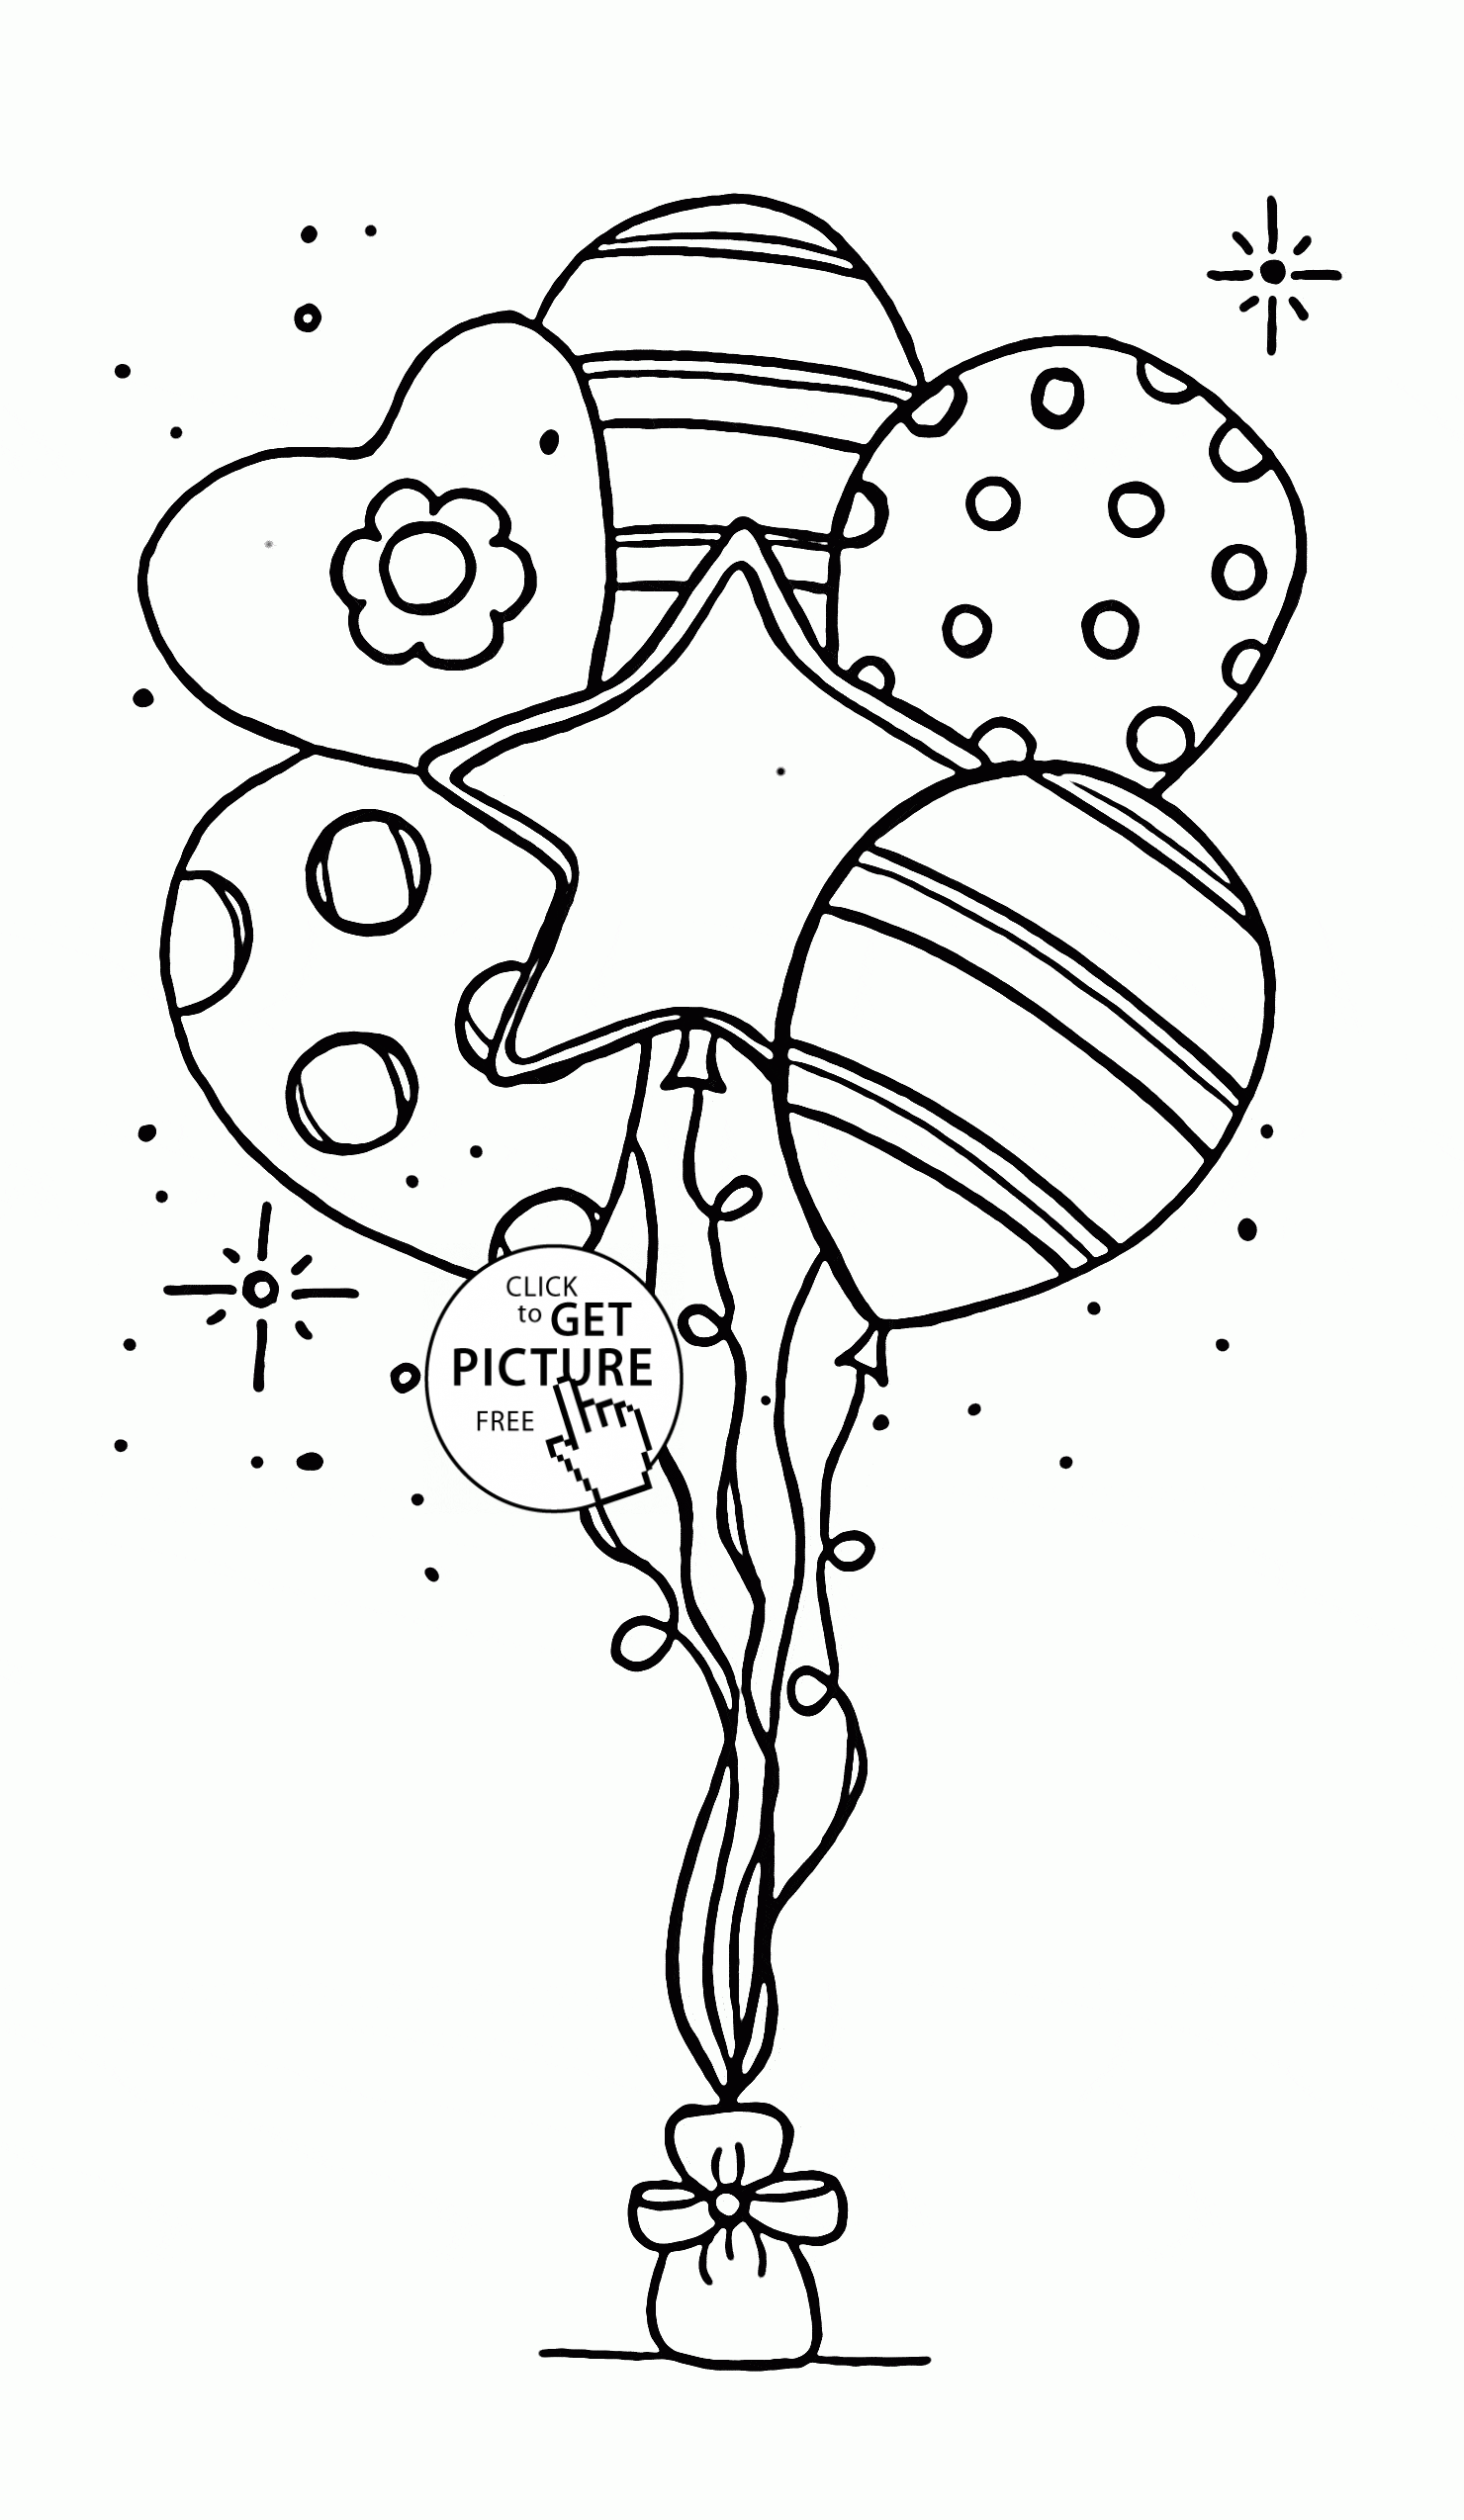 free-printable-birthday-coloring-pages-for-adults-58-best-images-about-happy-birthday-coloring